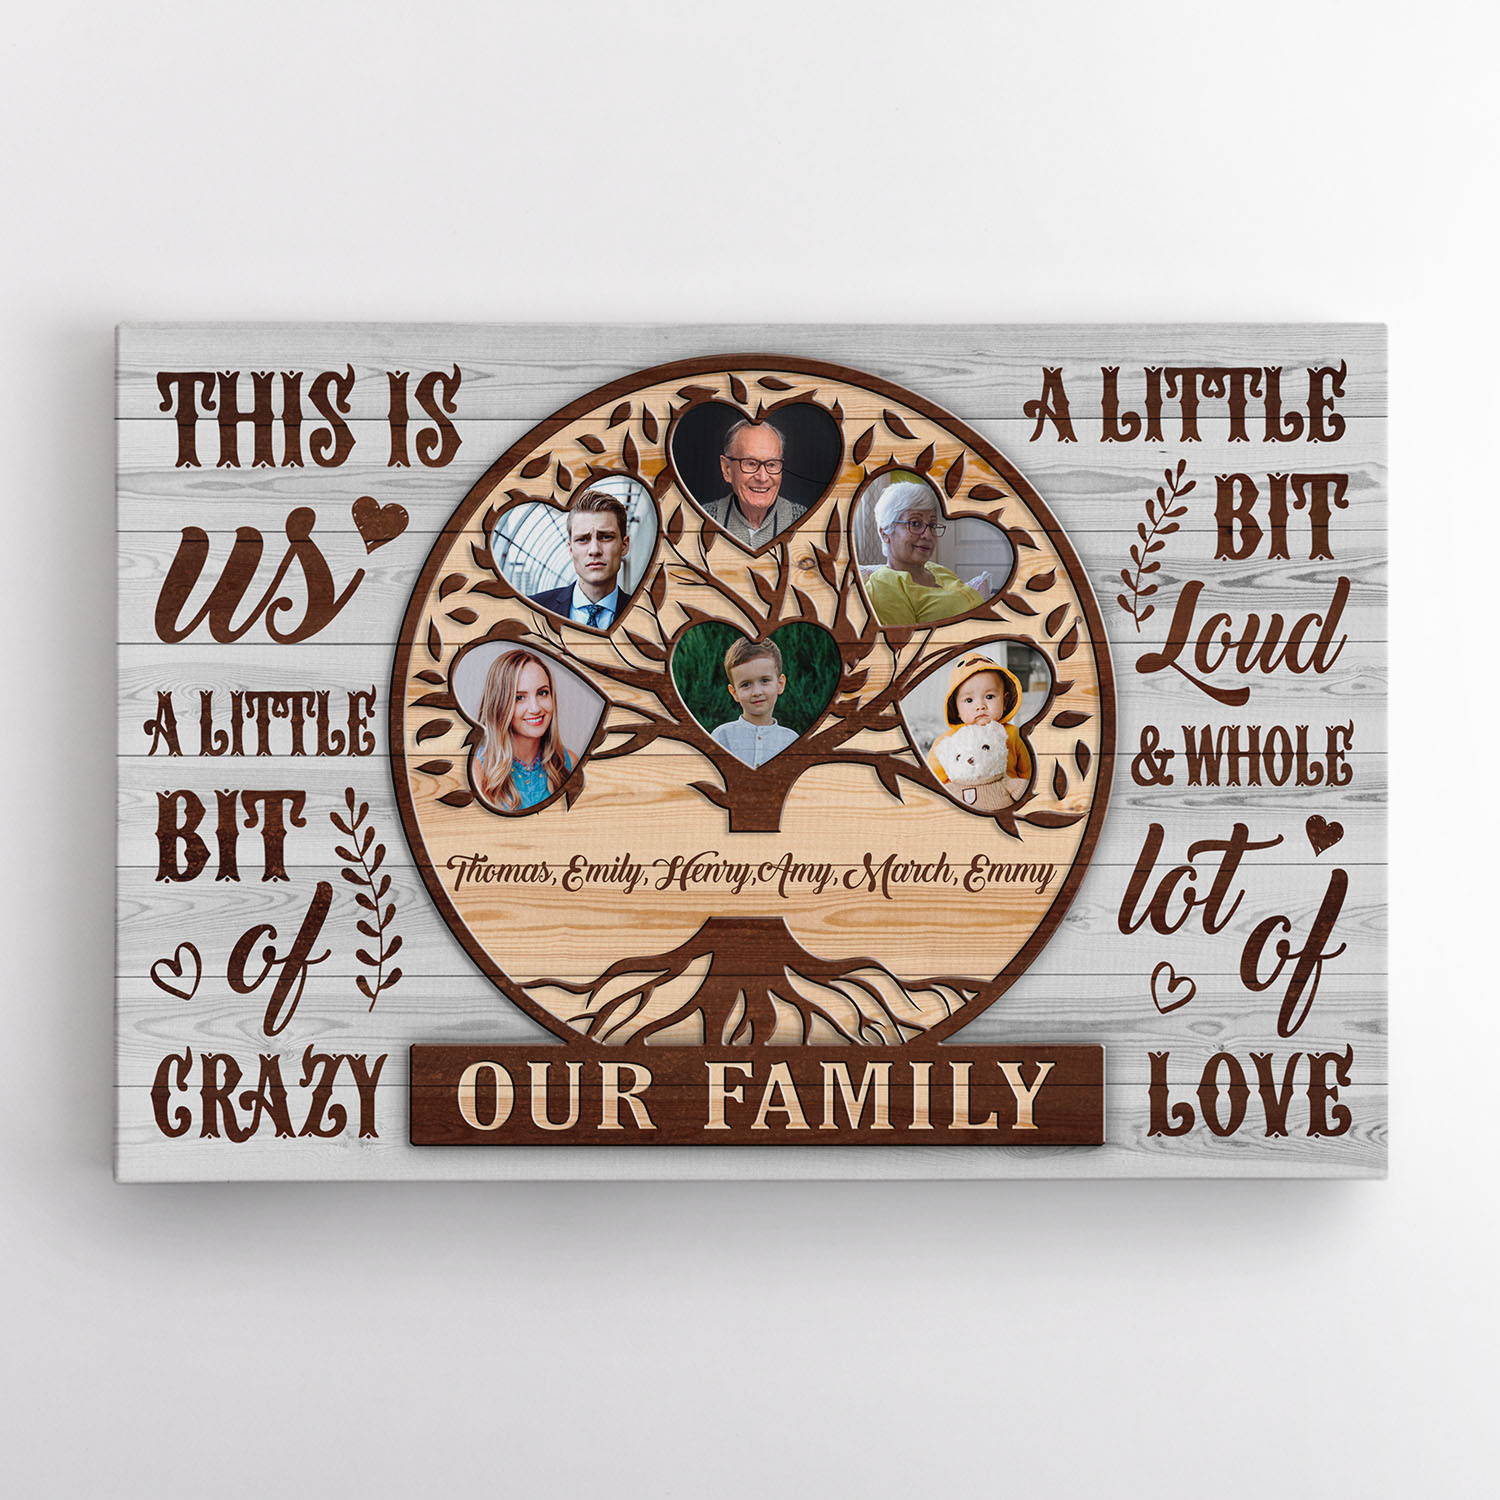 Your family is a big one that grandma and grandpa are the lead. So, why not pick this creative and modern Family Tree Custom Photo Canvas to send your love to them. The uniqueness, elegant style, and durable material of this canvas will not let you down. Get your family album out, pick your favorite photos, and make happy grandparents day memories today!